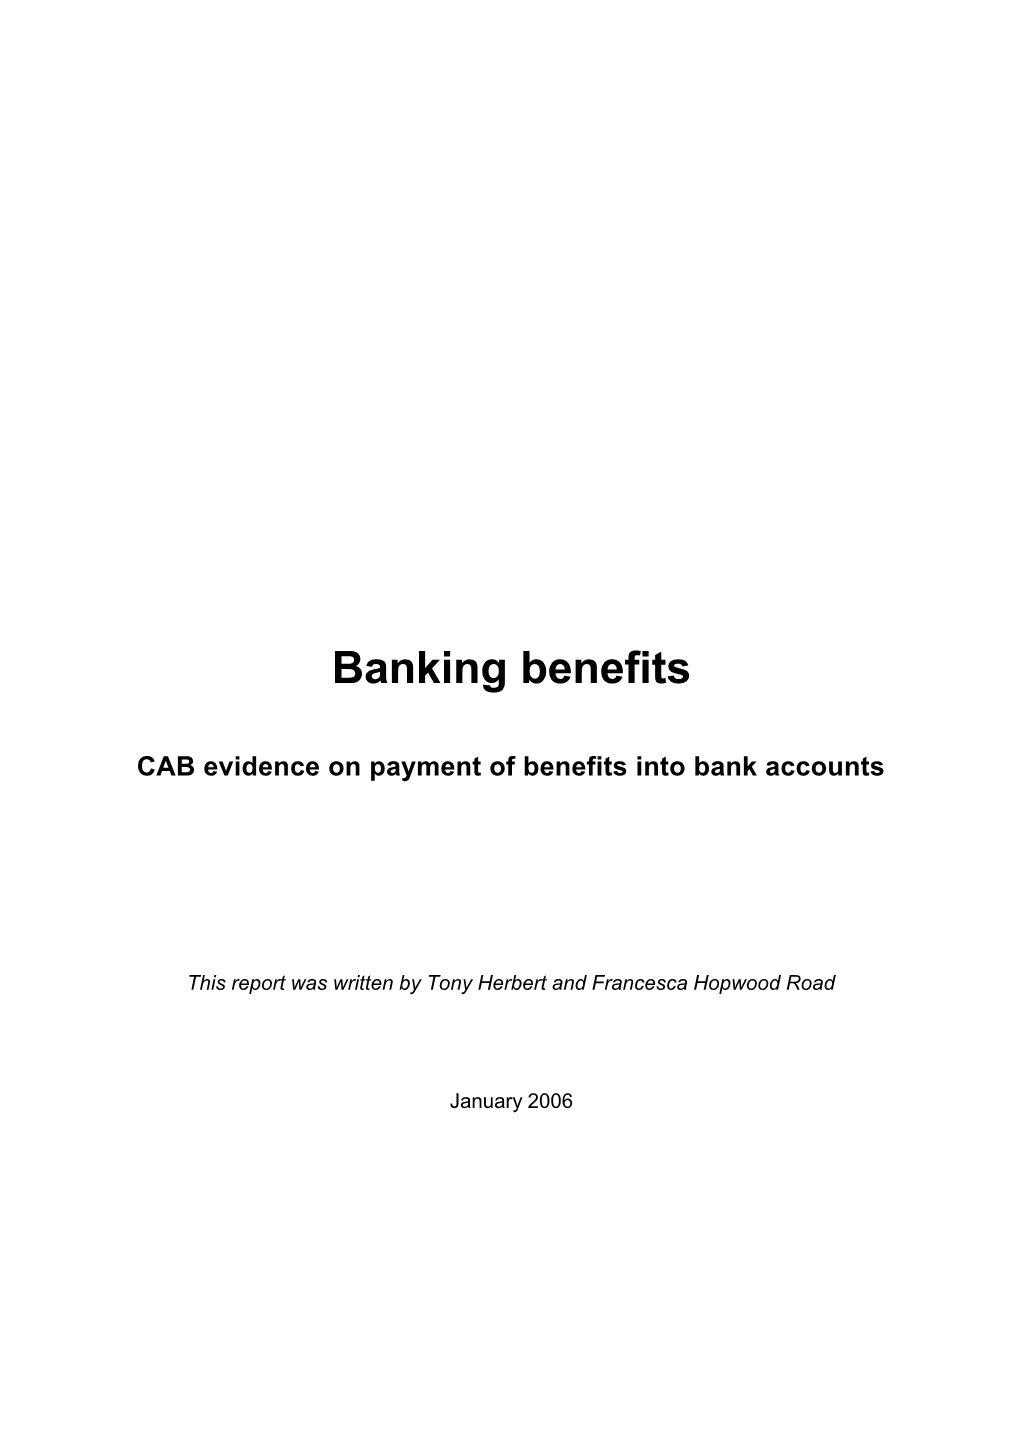 CAB Evidence on Payment of Benefits Into Bank Accounts